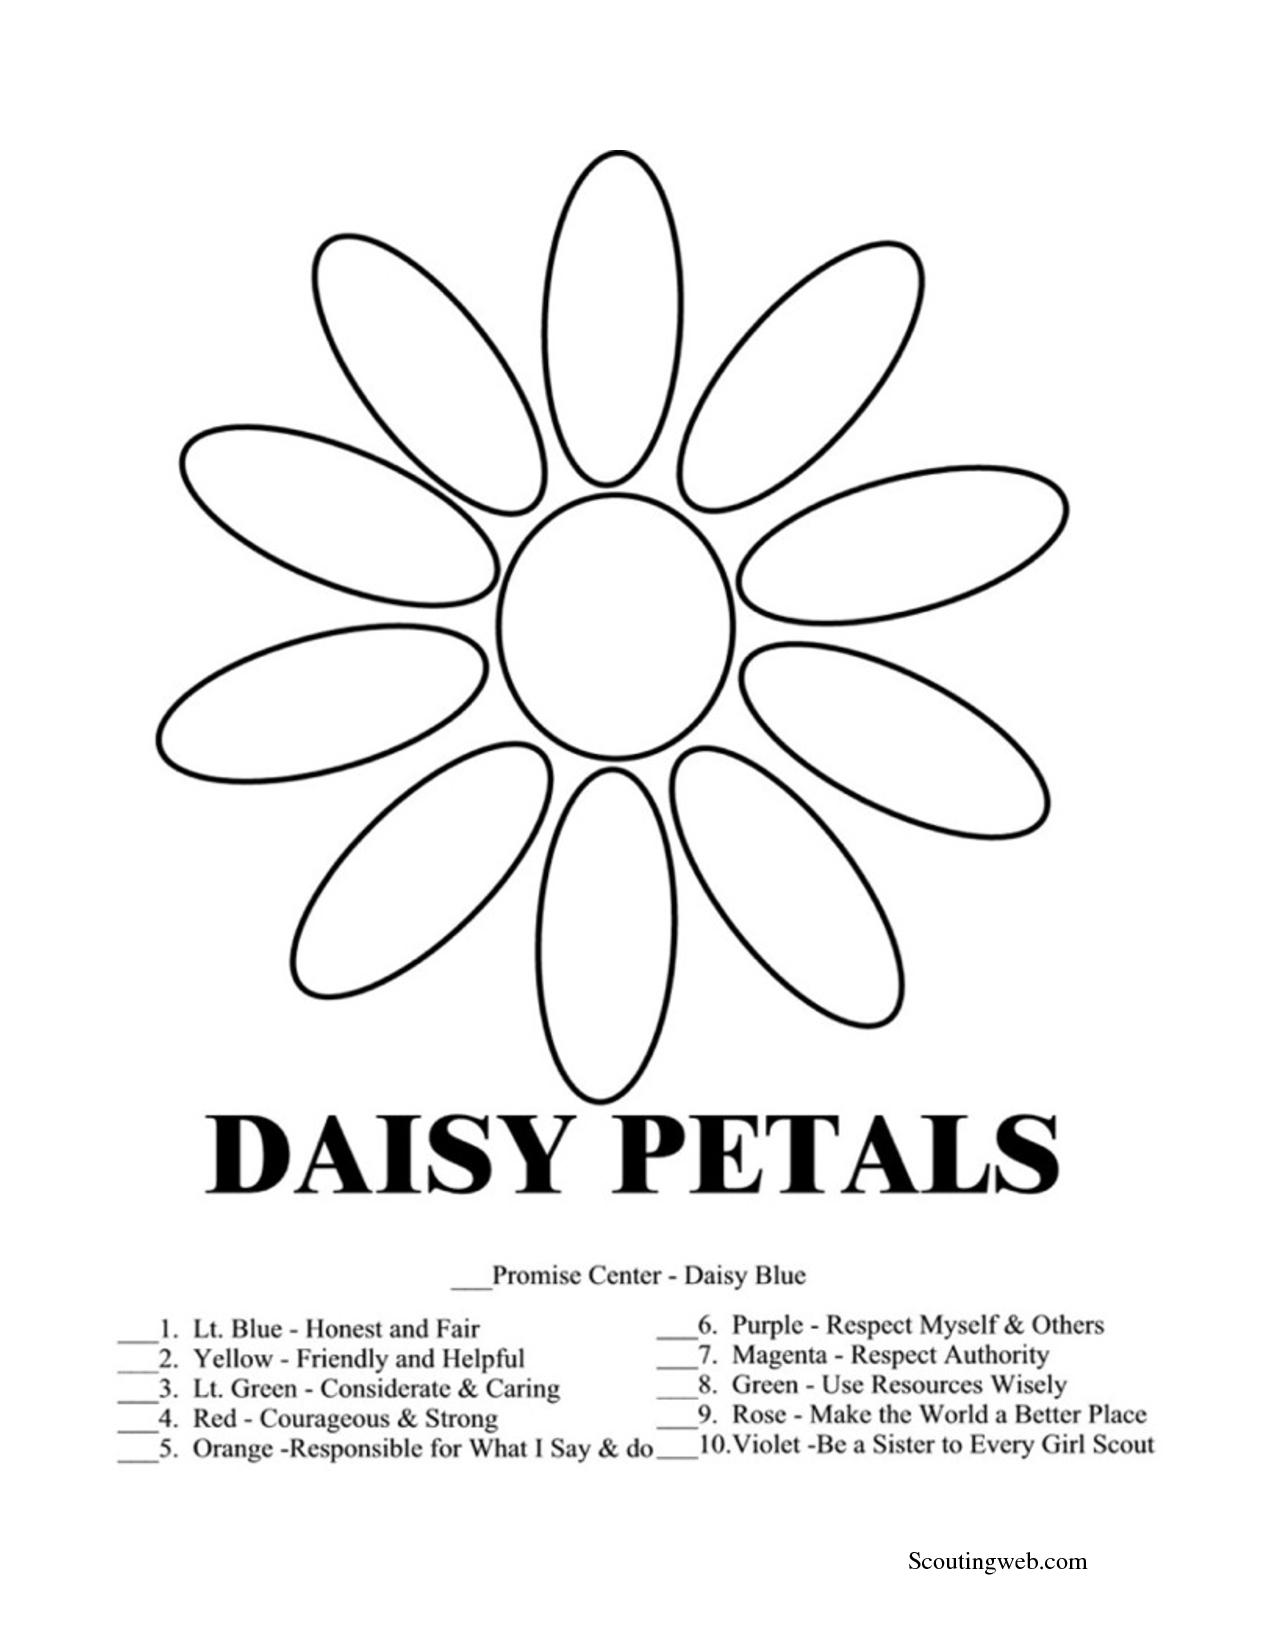 Daisy Petal Coloring Page | Girl scout law, Girl scout daisy ...